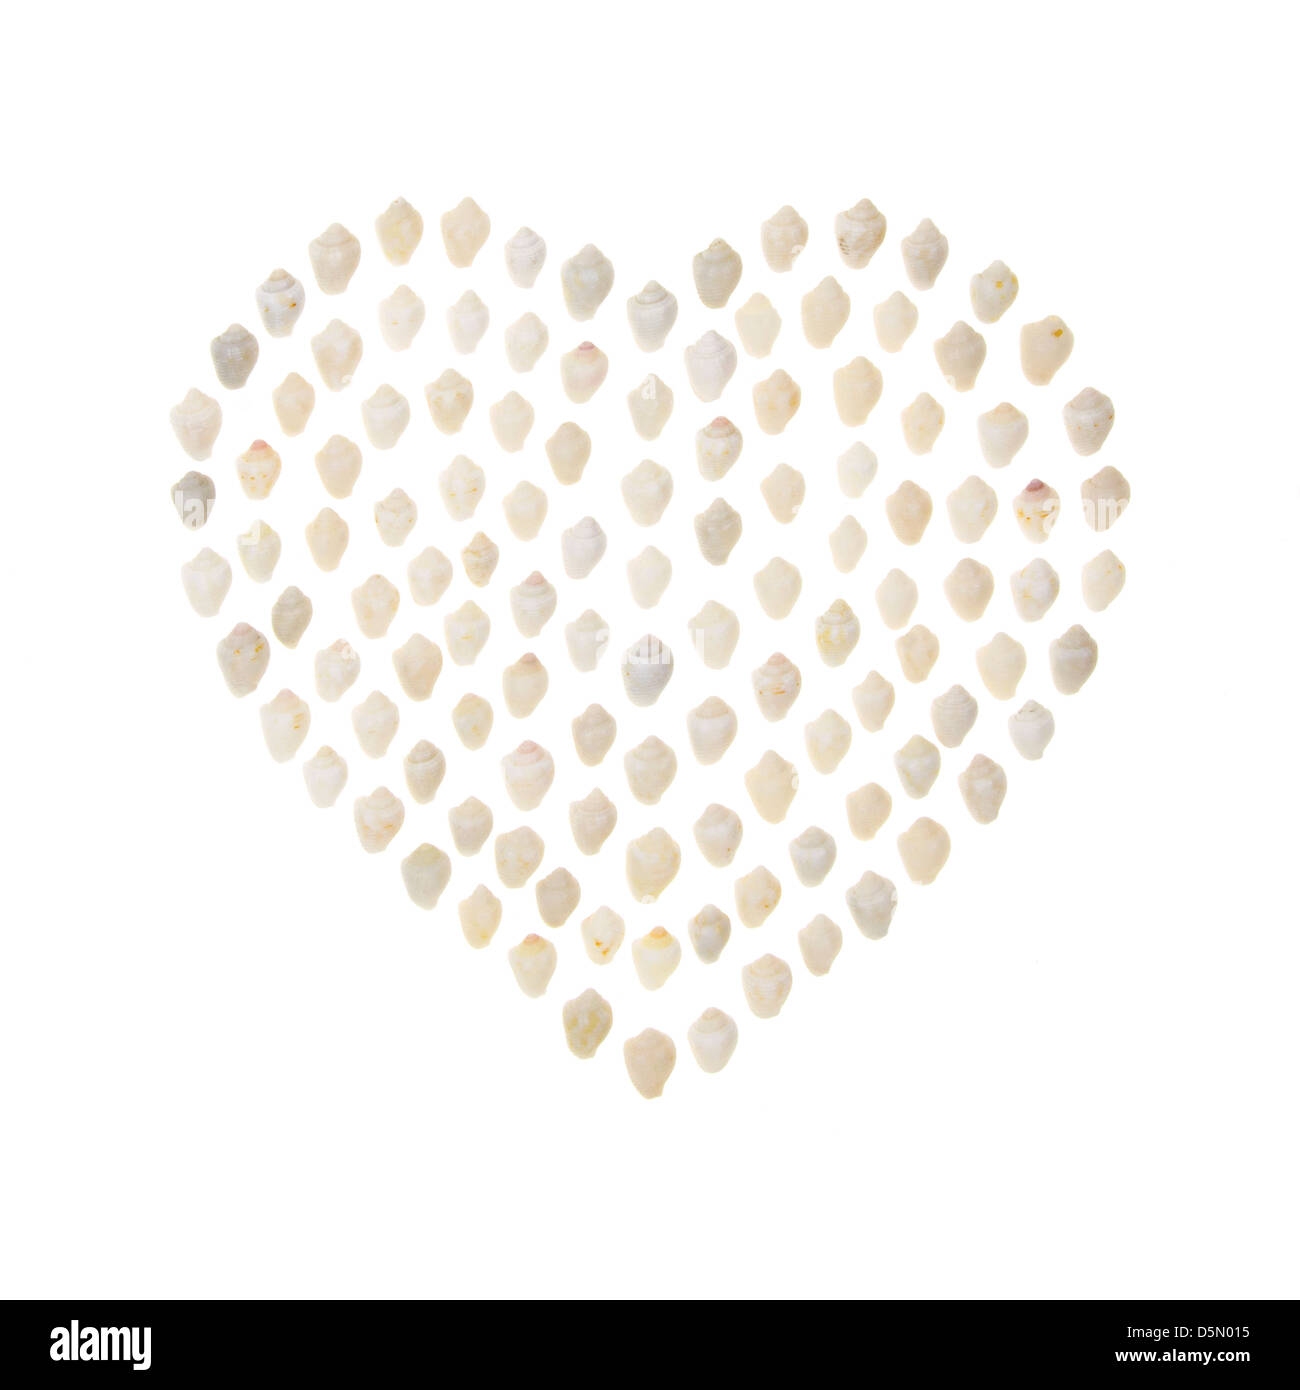 A modern take on the traditional Sailor's Valentine with Common Dove Snail shells neatly arranged on a white background. Stock Photo